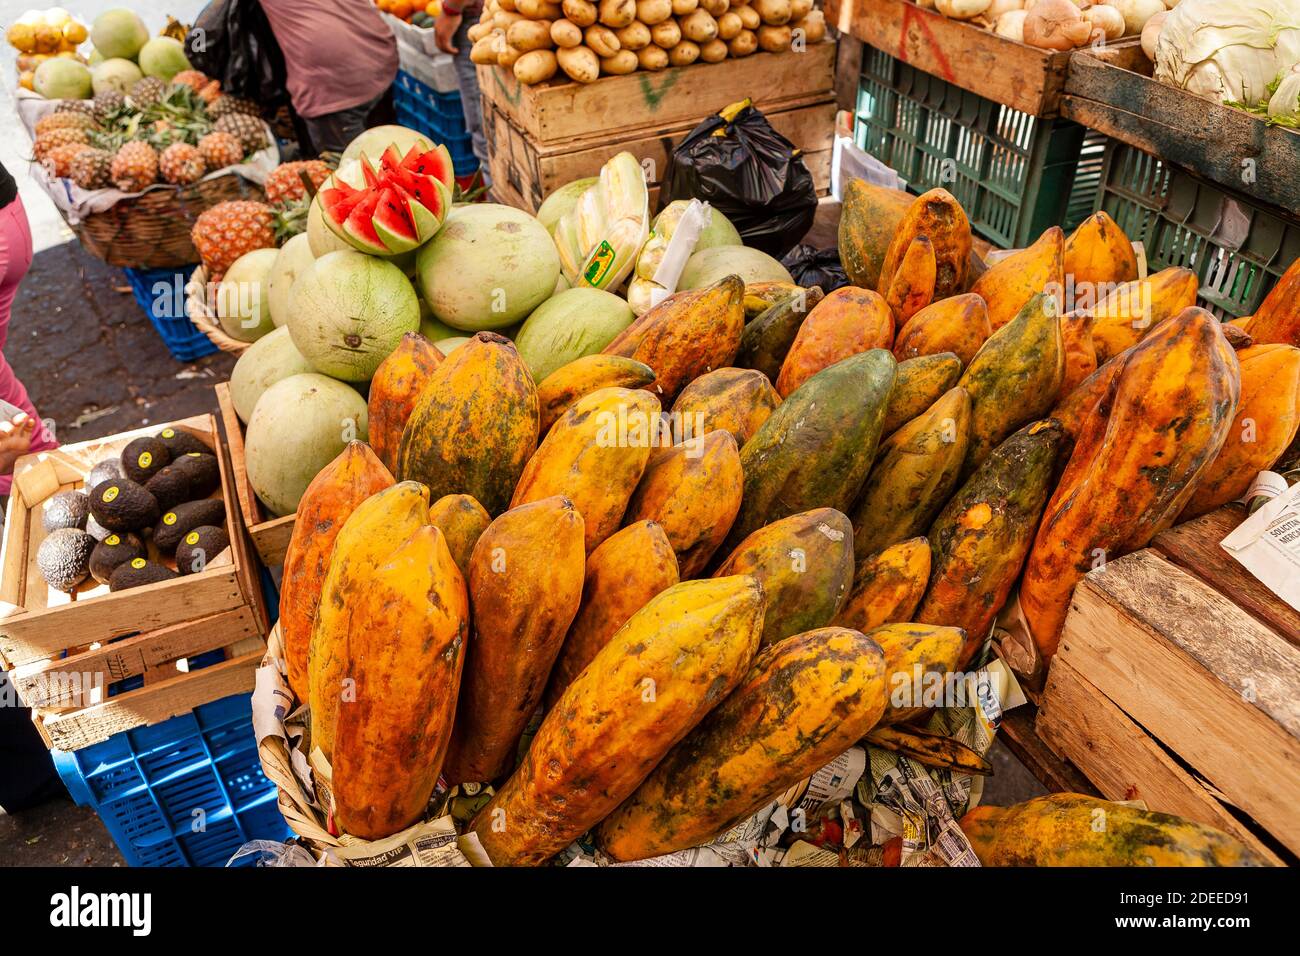 A variety of fresh fruit in a Guatemalan outdoor food market. Stock Photo